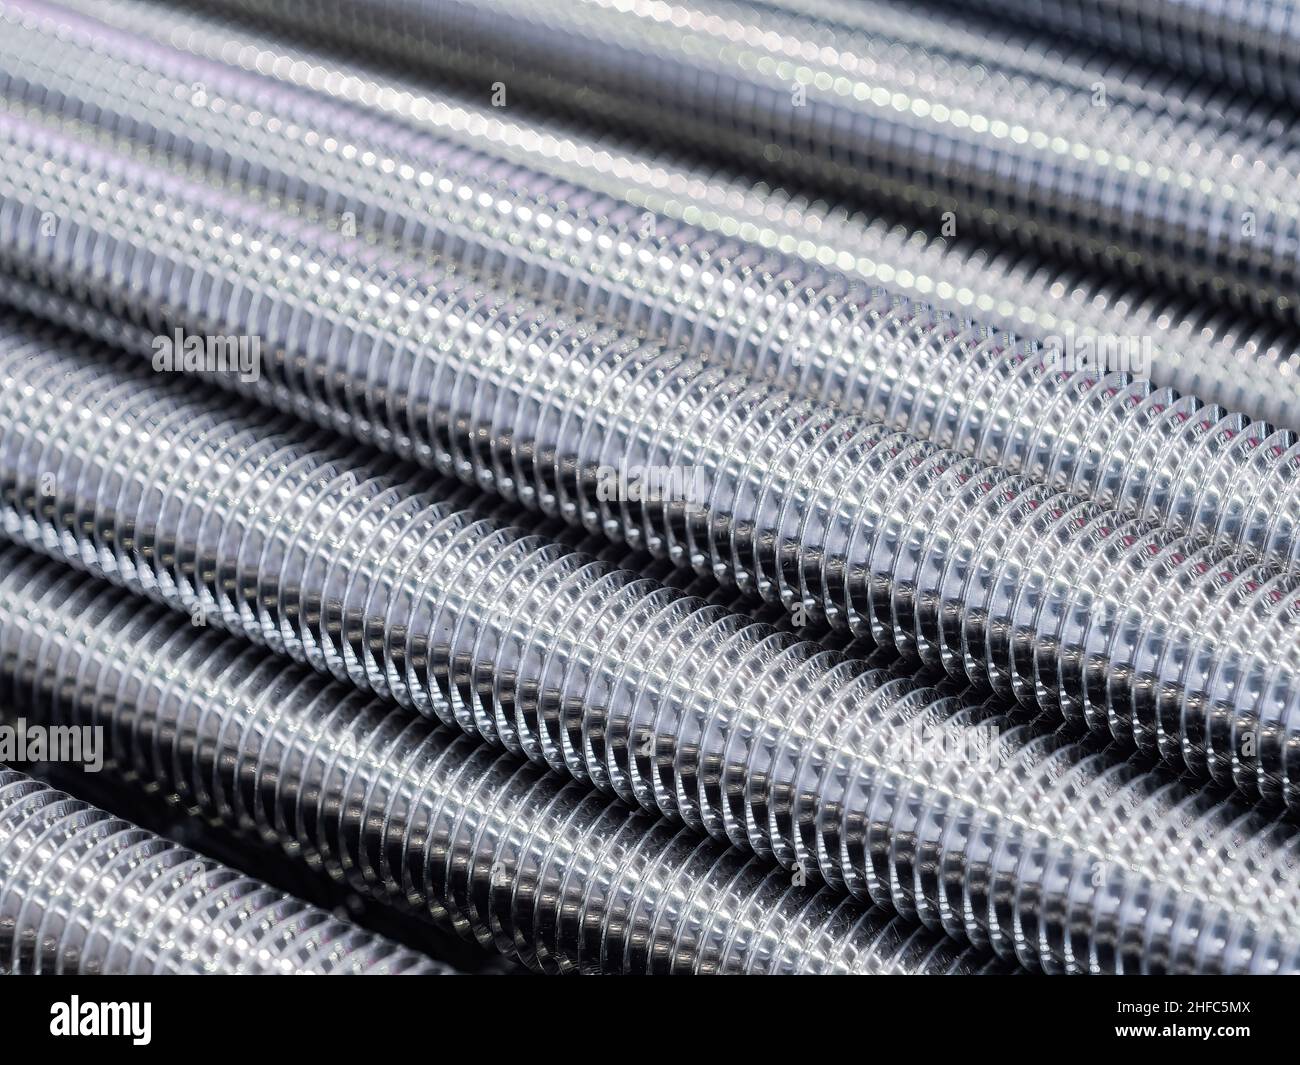 https://c8.alamy.com/comp/2HFC5MX/stainless-steel-threaded-rods-abstract-background-2HFC5MX.jpg